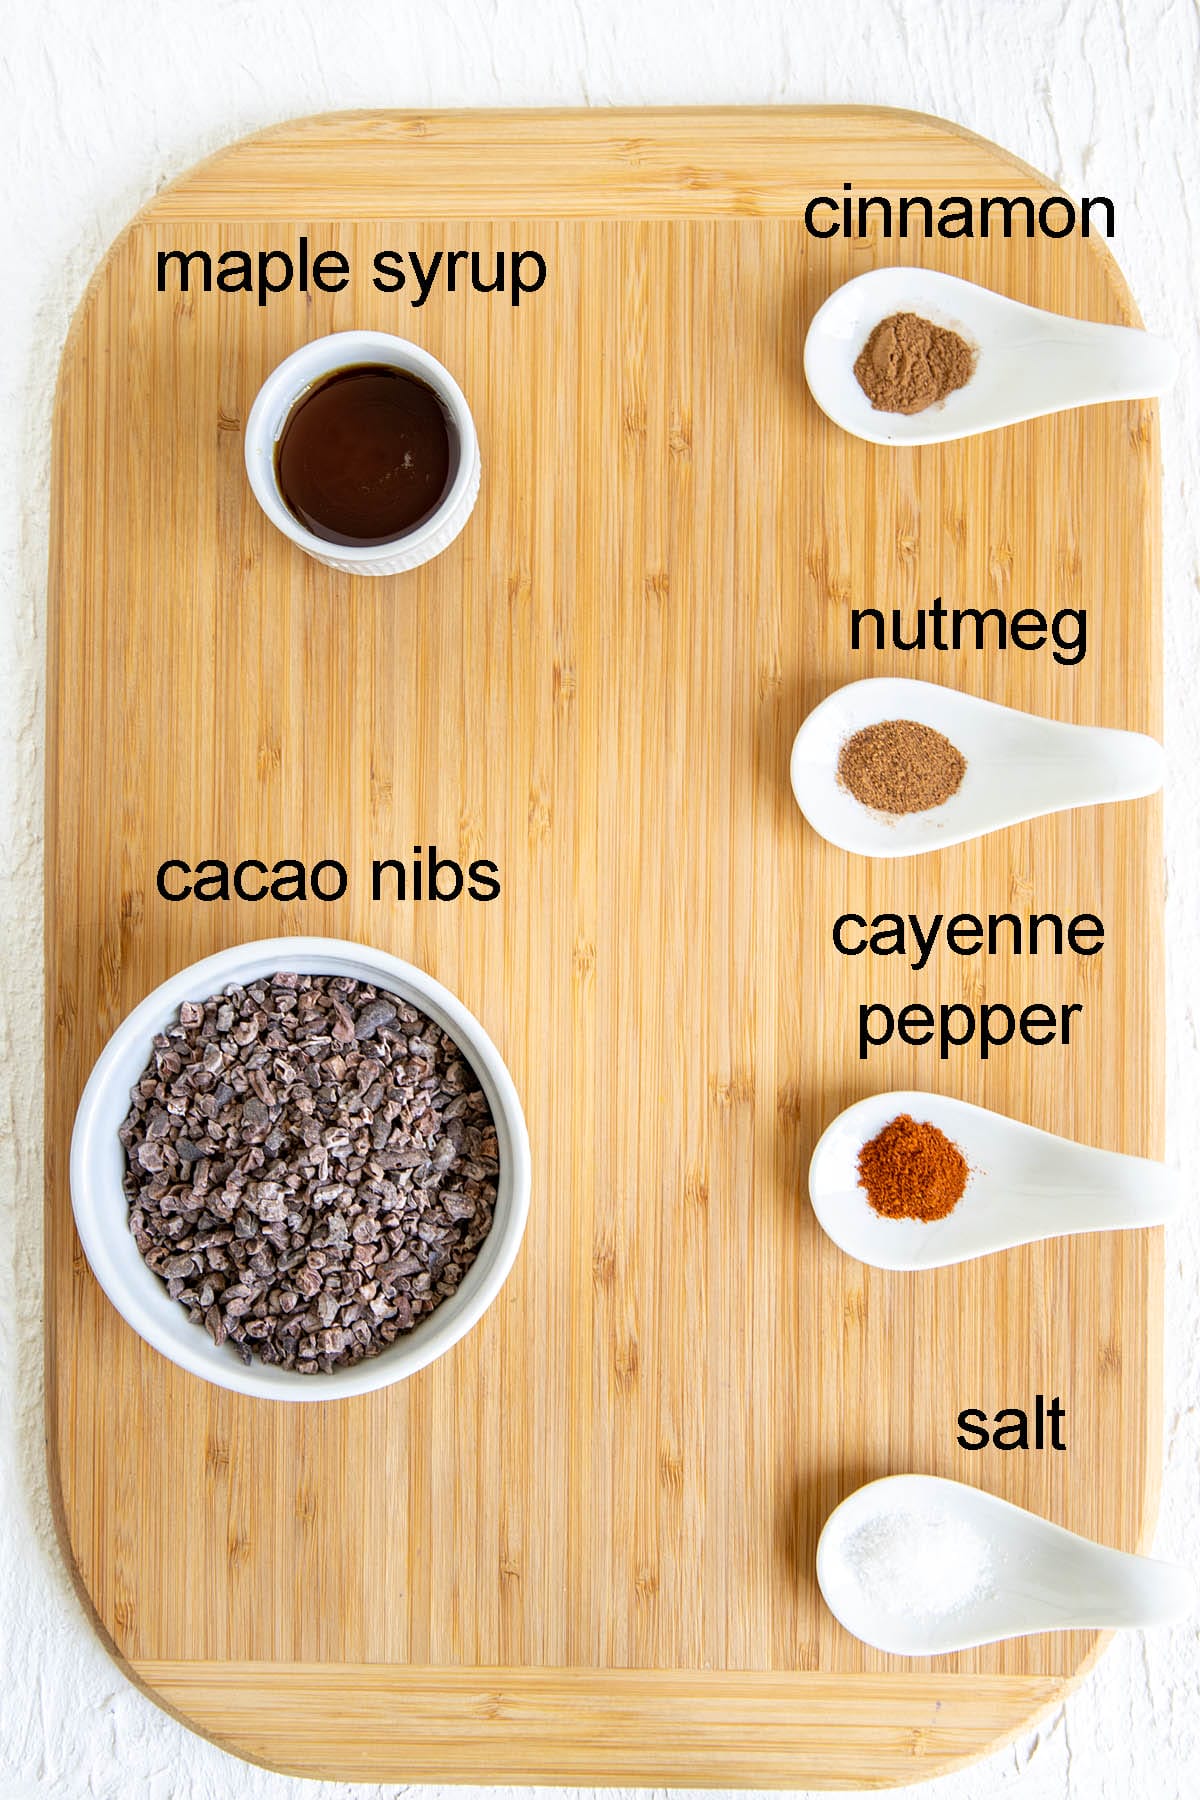 Ingredients for candied cacao nibs on a cutting board with labels.